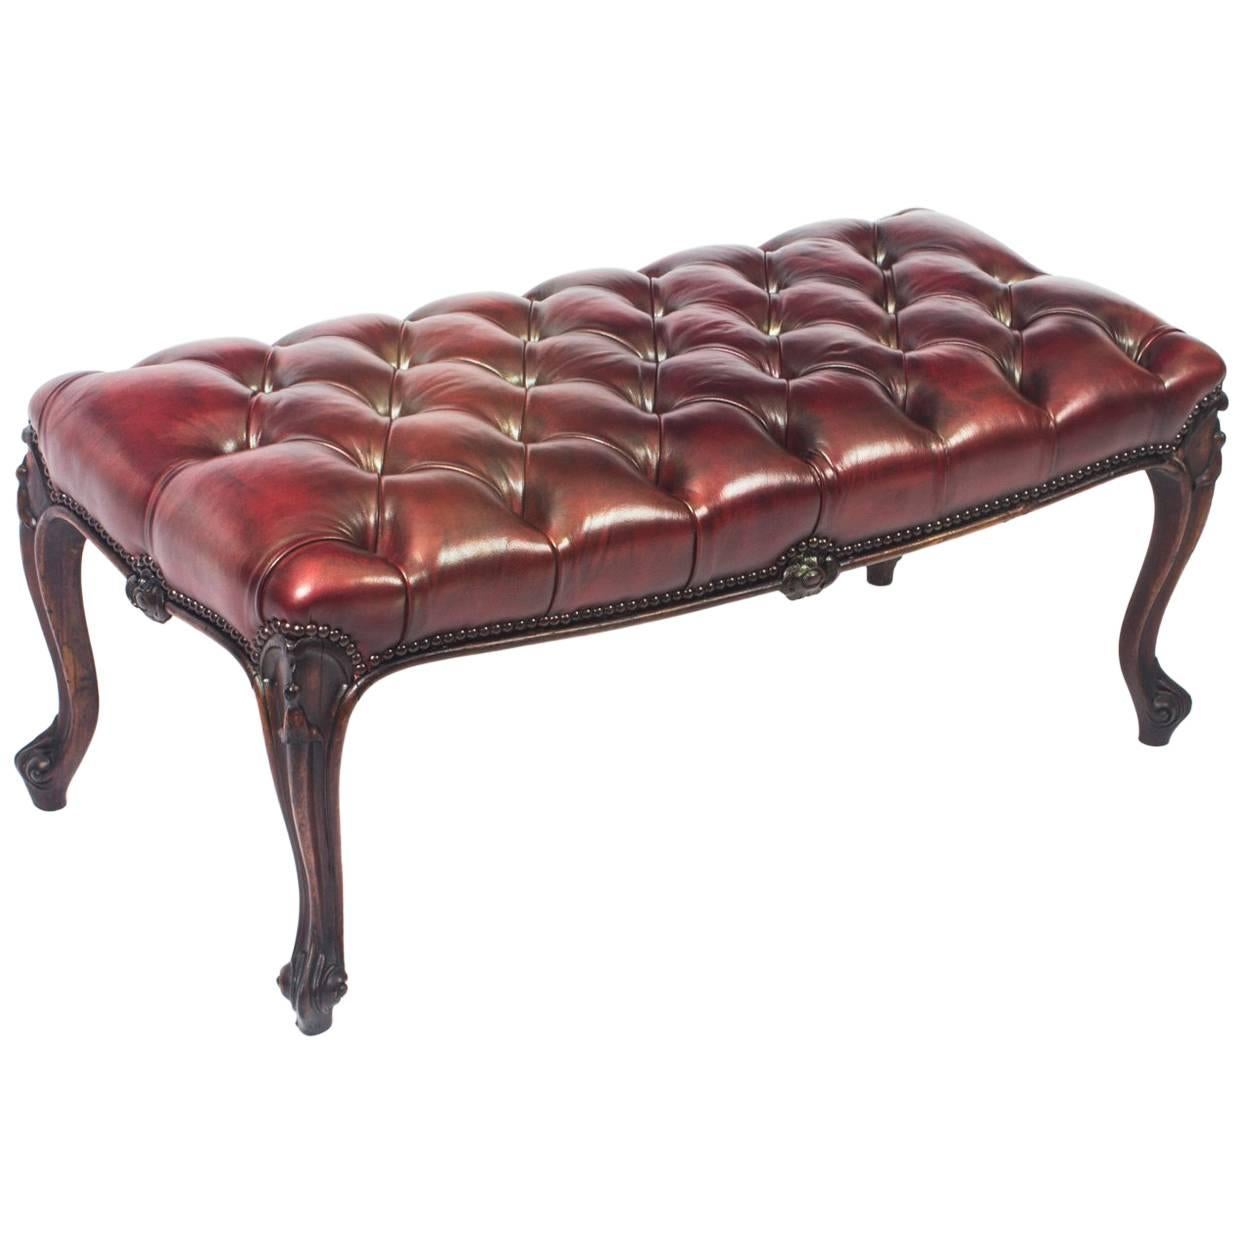 Victorian Buttoned Leather Ox Blood Stool Ottoman Coffee Table 19th Century